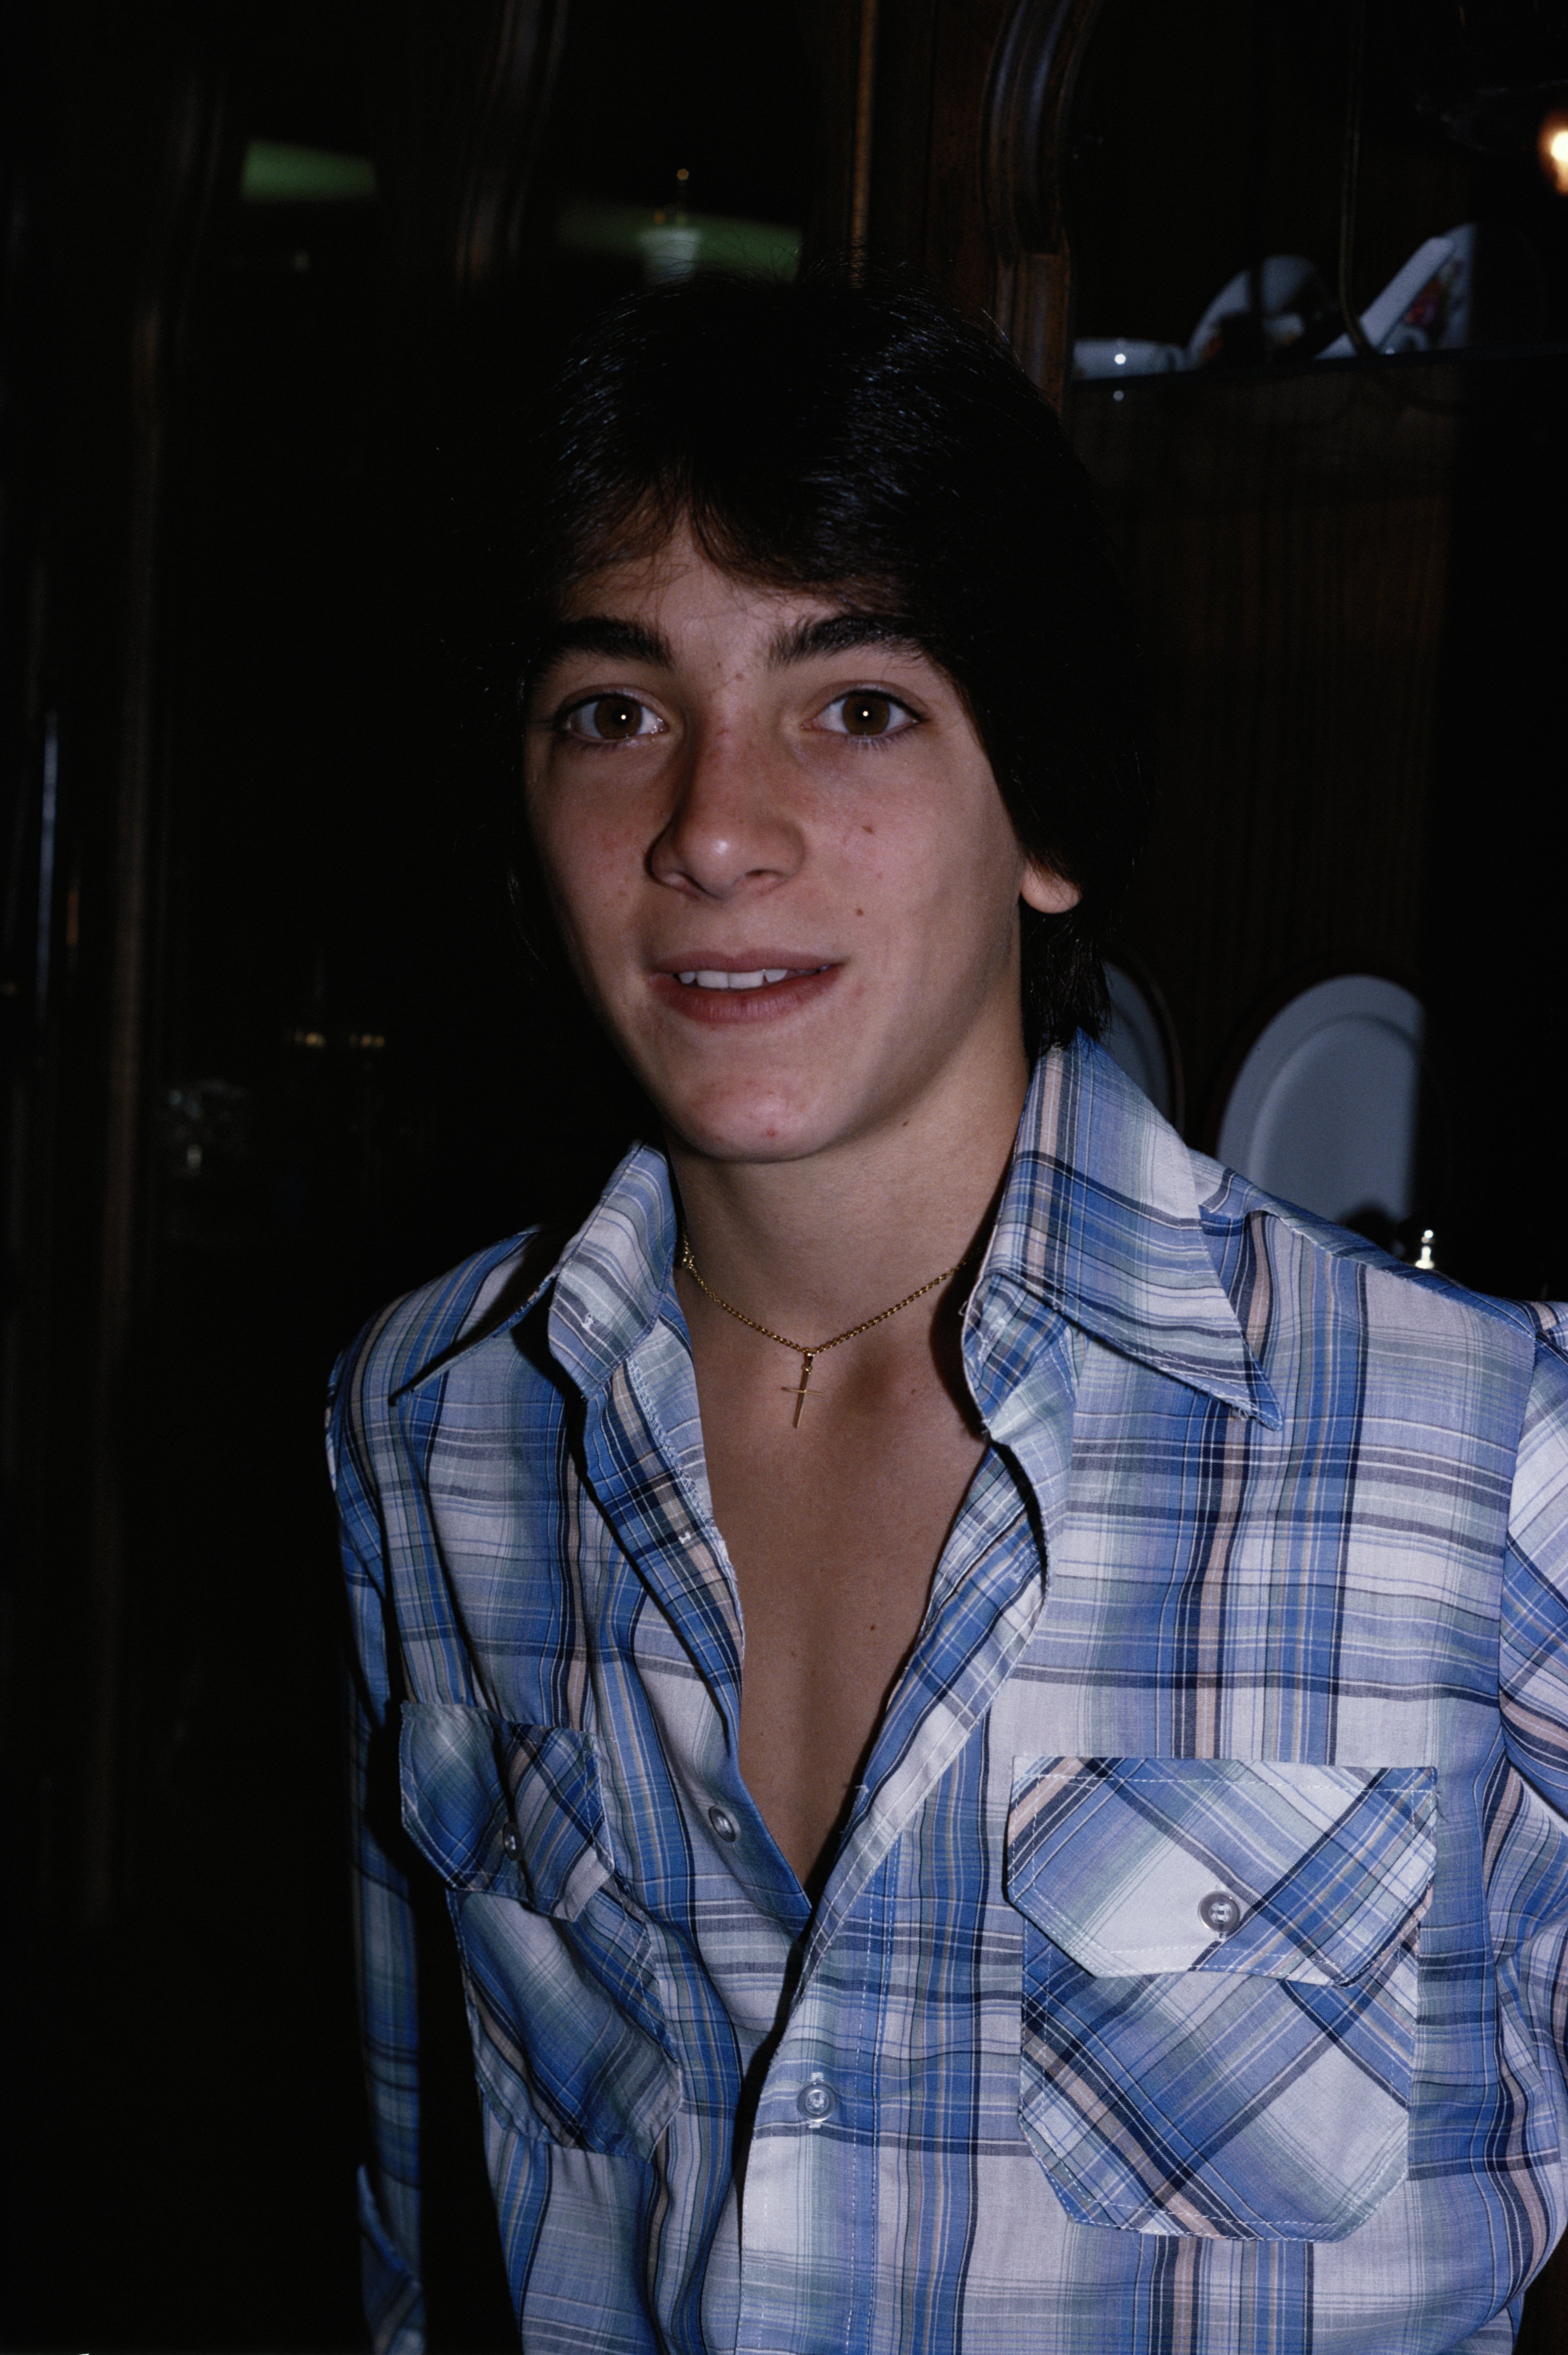 Television star Scott Baio posing at his home for a magazine shoot in November 1978. / Source: Getty Images